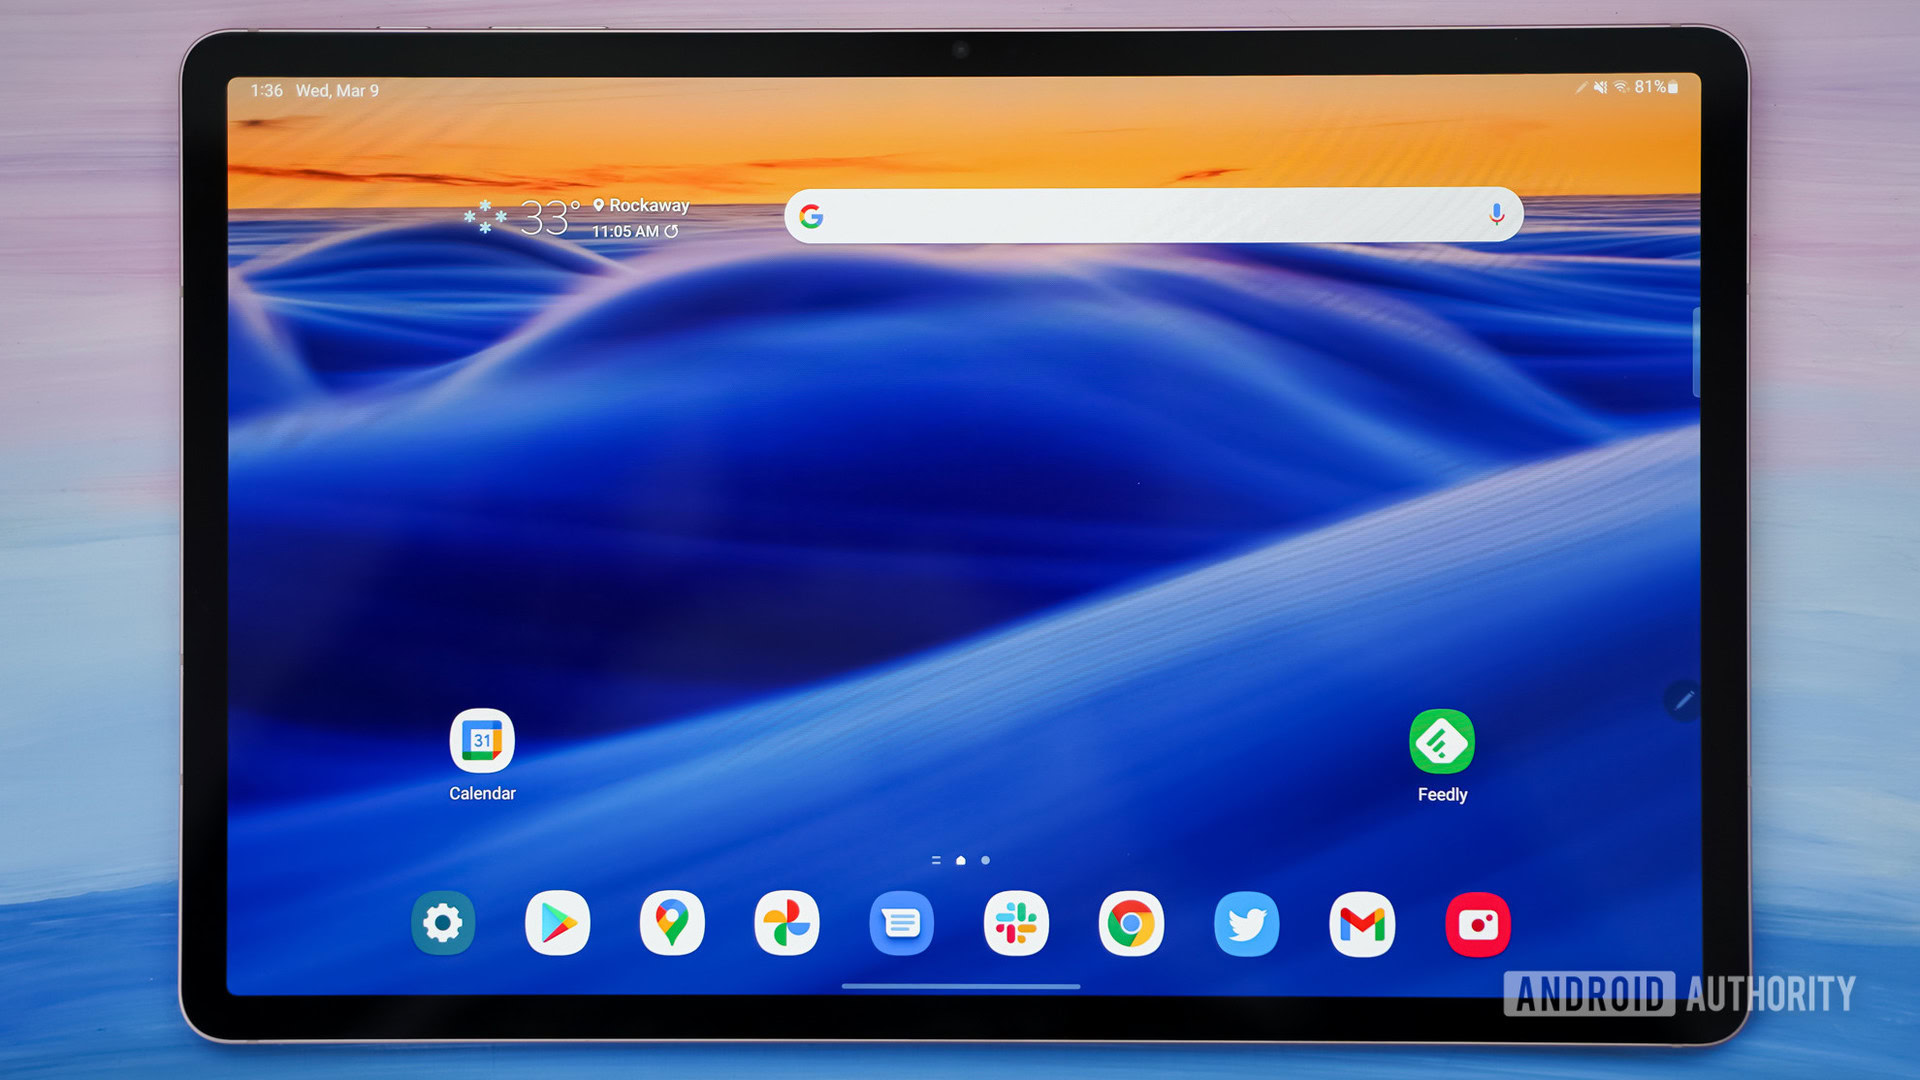 Samsung Galaxy Tab S8 Ultra now official with Snapdragon 8 Gen 1, Wi-Fi 6E,  11,200 mAh battery, and more starting from €1,149 -  News